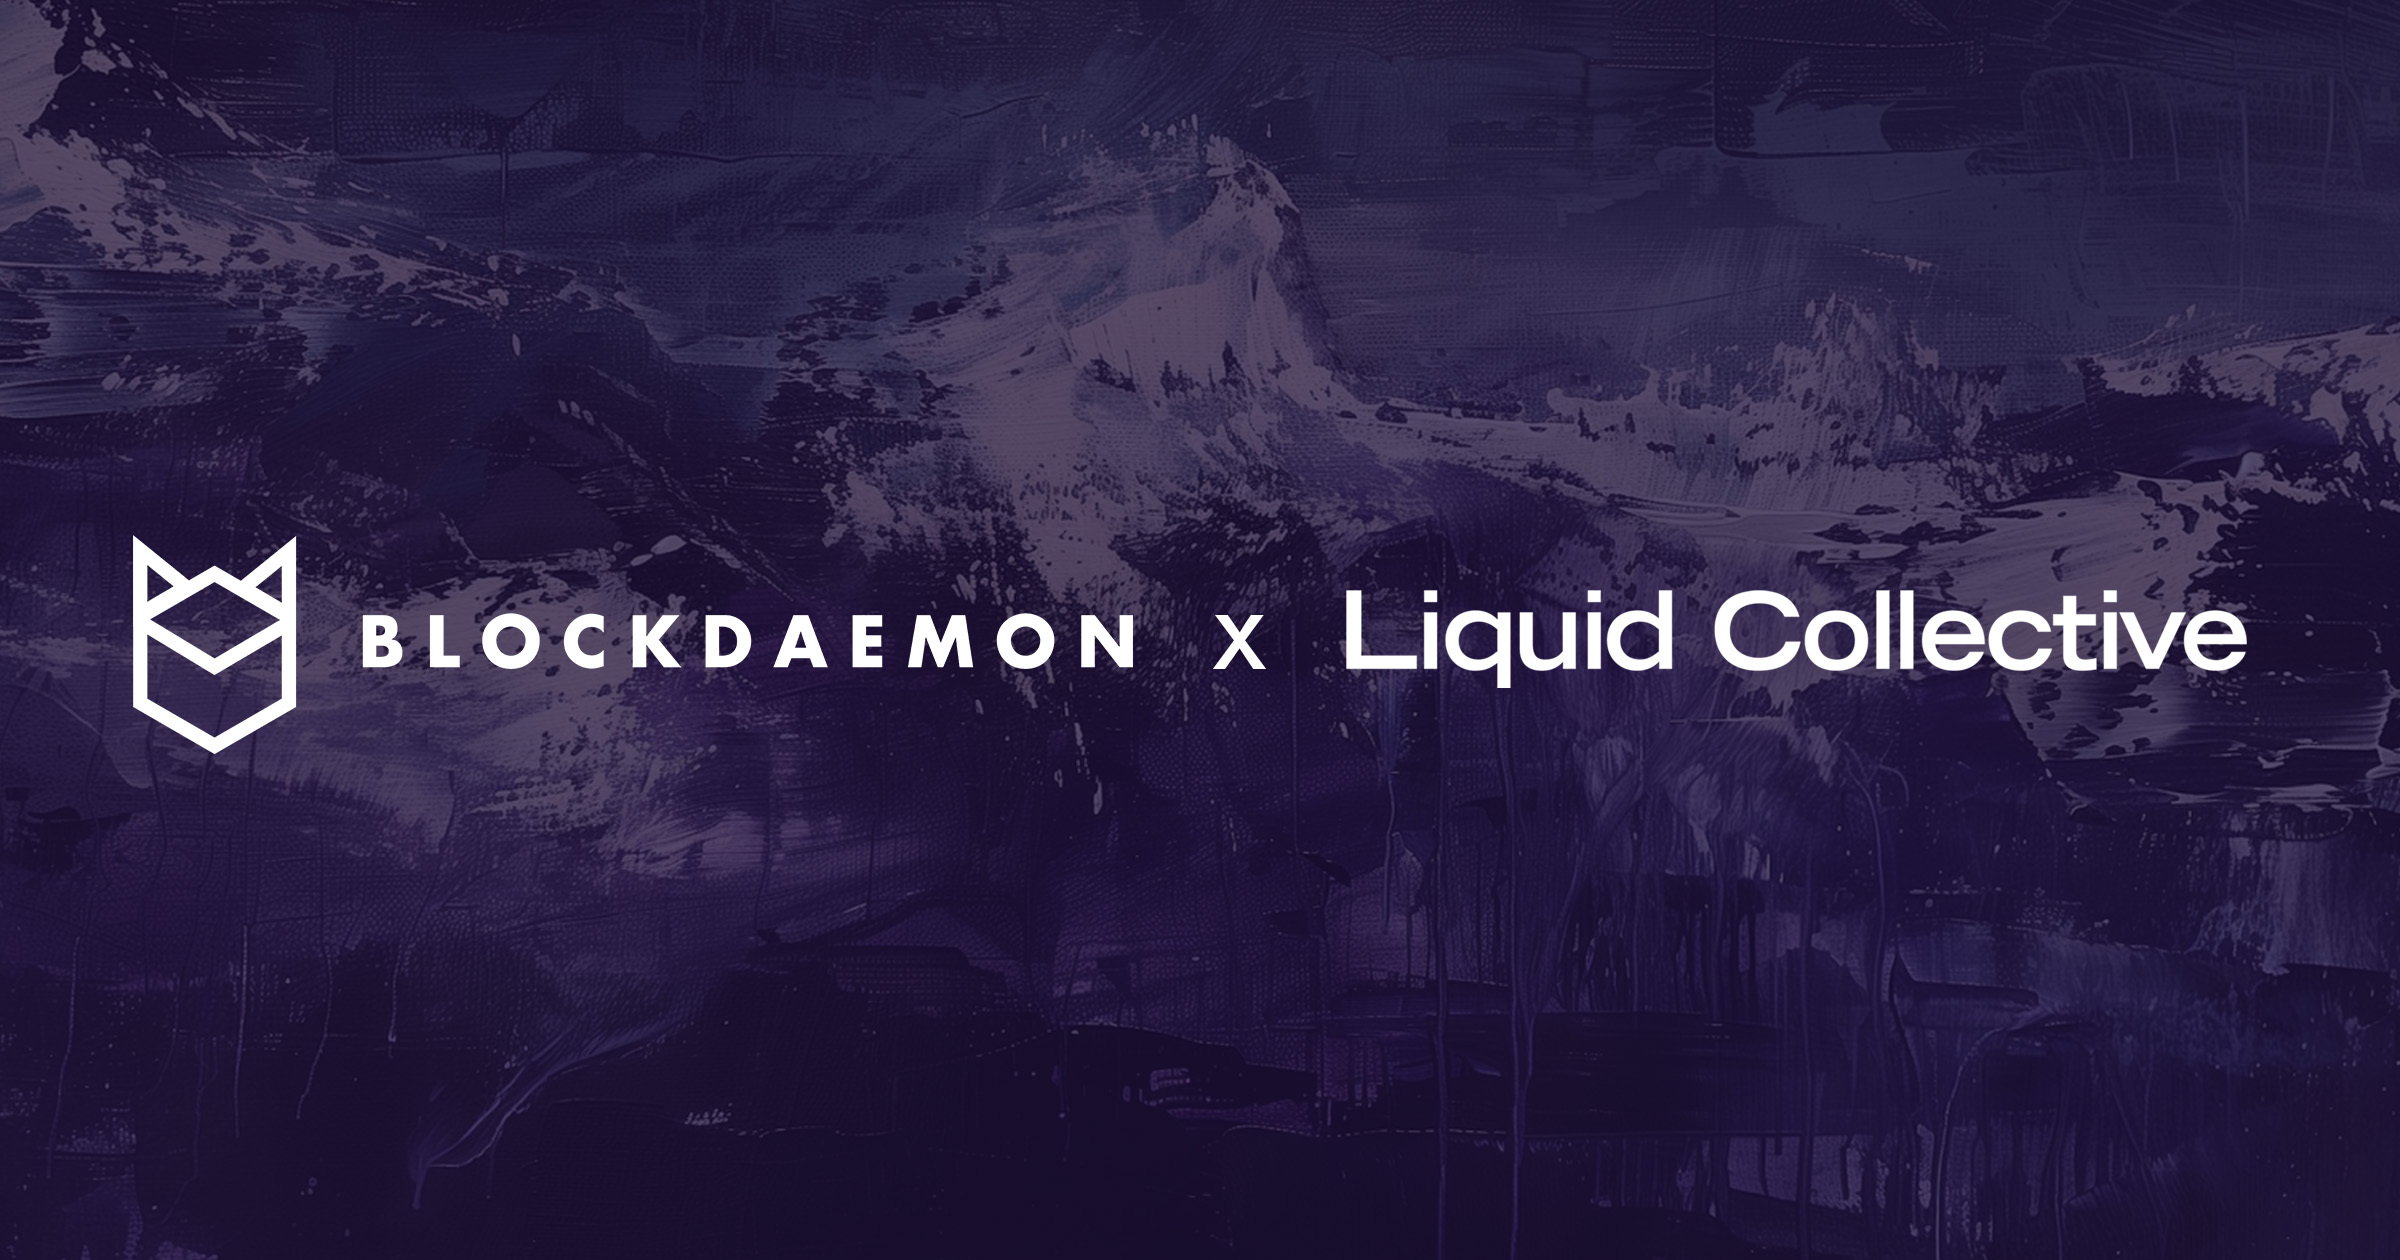 Blockdaemon will launch support for Liquid Collective